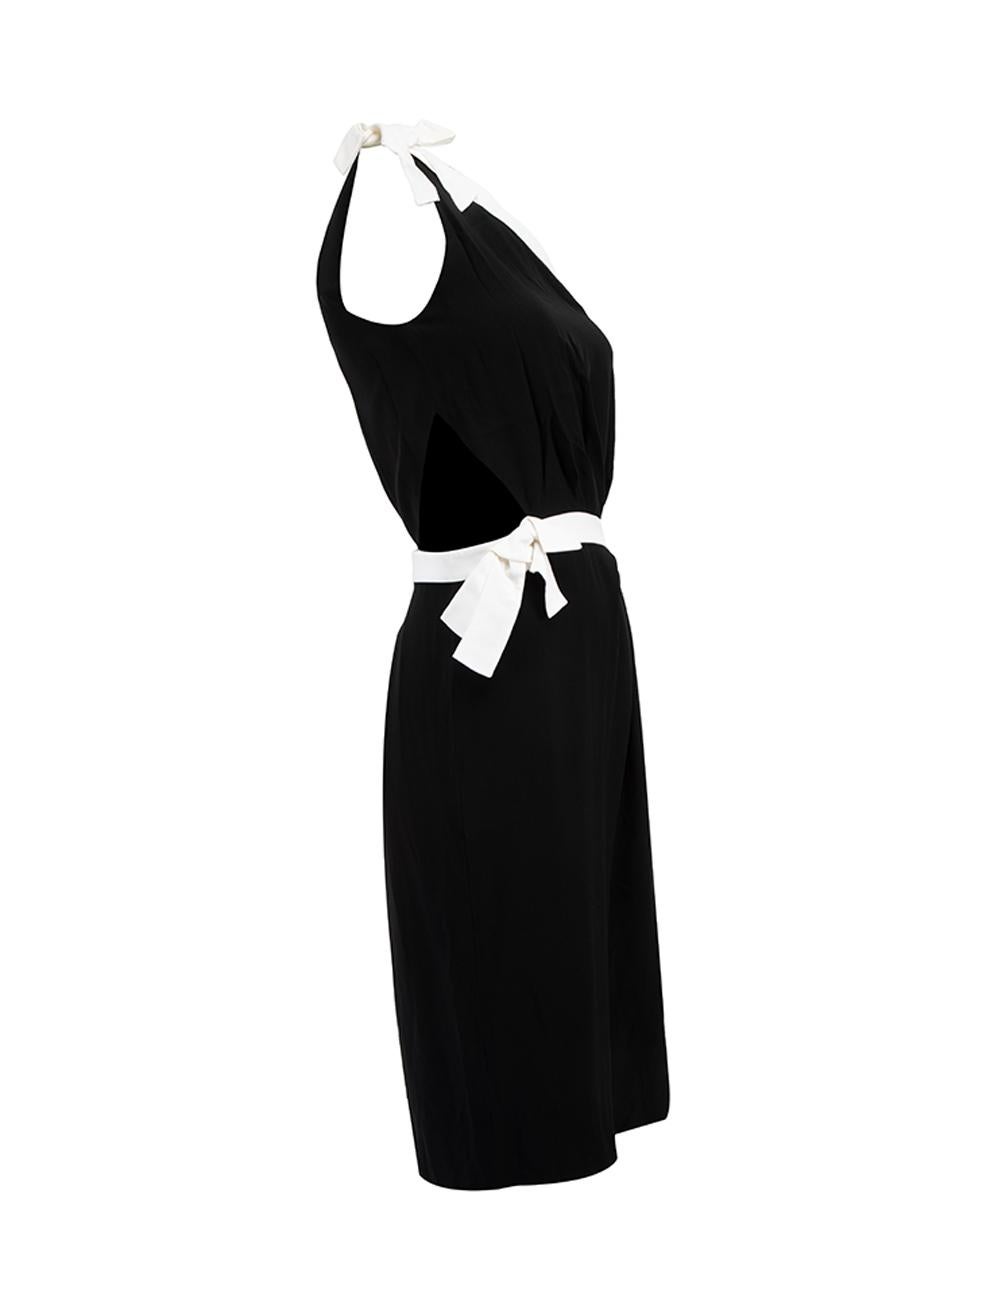 CONDITION is Very good. Hardly any visible wear to dress is evident on this used Azzaro designer resale item.
 
 
 
 Details
 
 
 Black, white details
 
 Acetate, viscose blend
 
 One shoulder
 
 Figure-hugging
 
 Right hip cutout
 
 Waist and